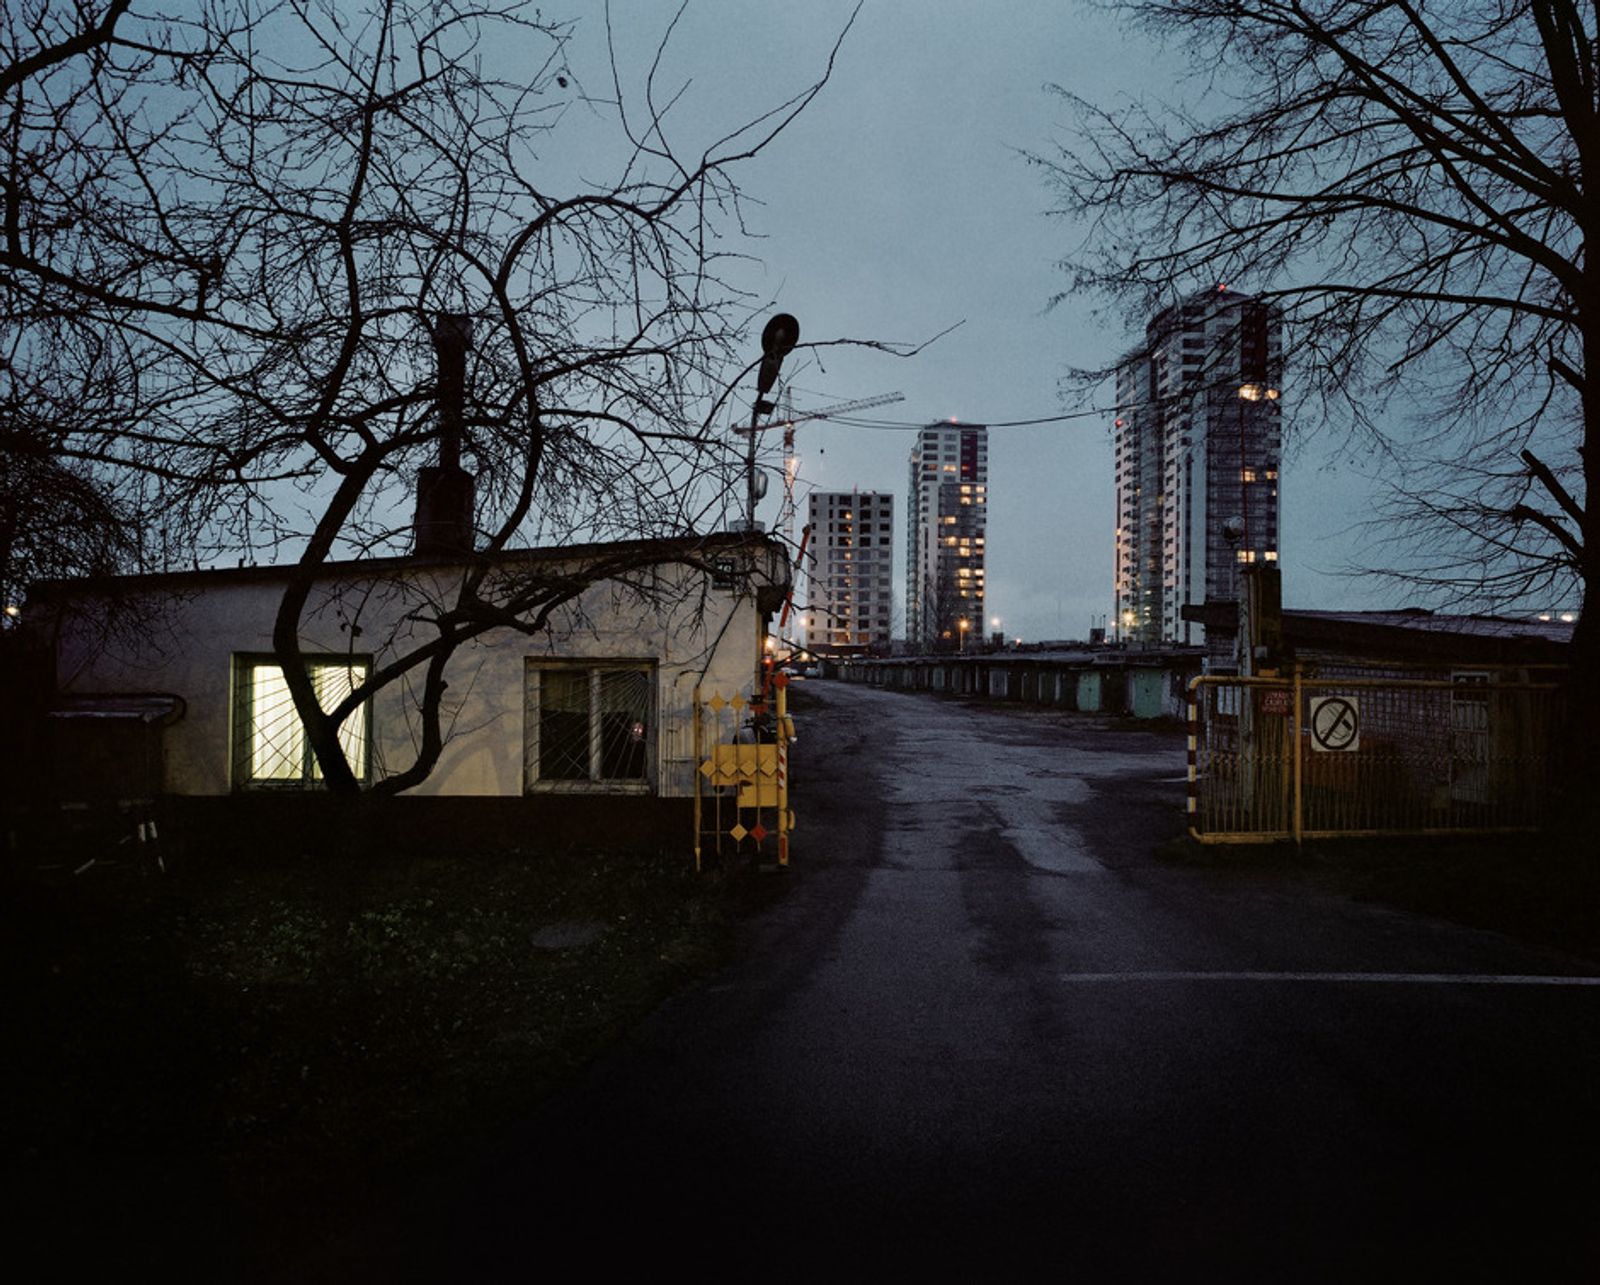 © Reinis Hofmanis - Image from the Territory photography project